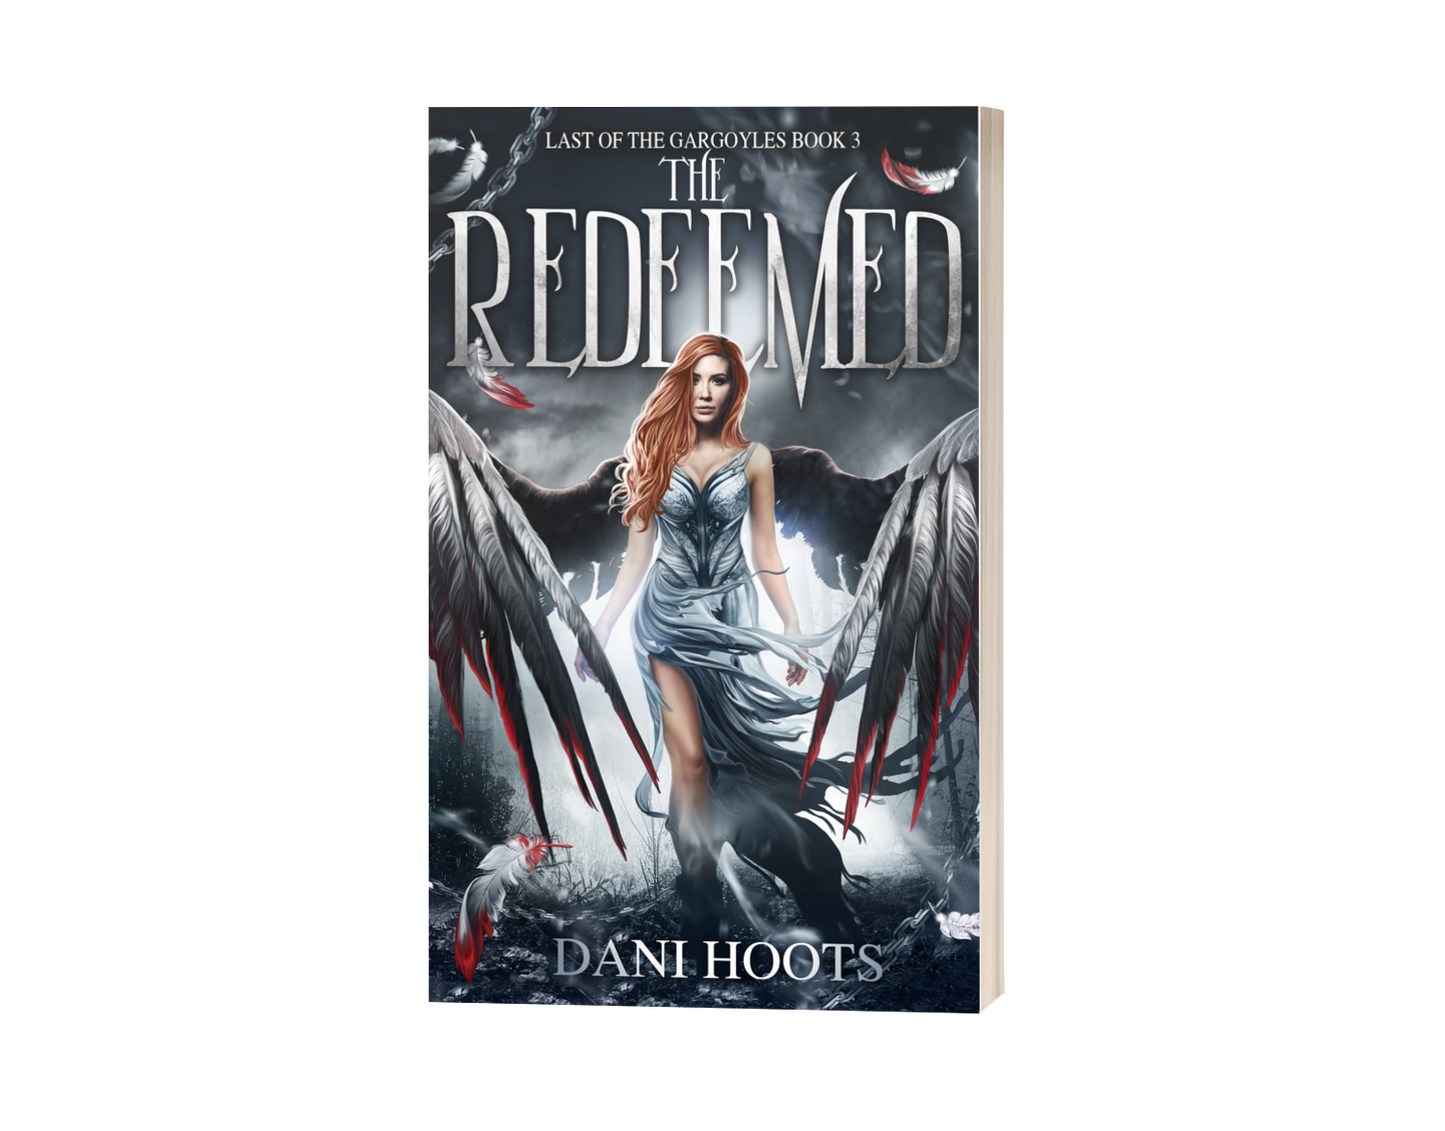 The Redeemed (Last of the Gargoyles, Book 3) paperback — SIGNED